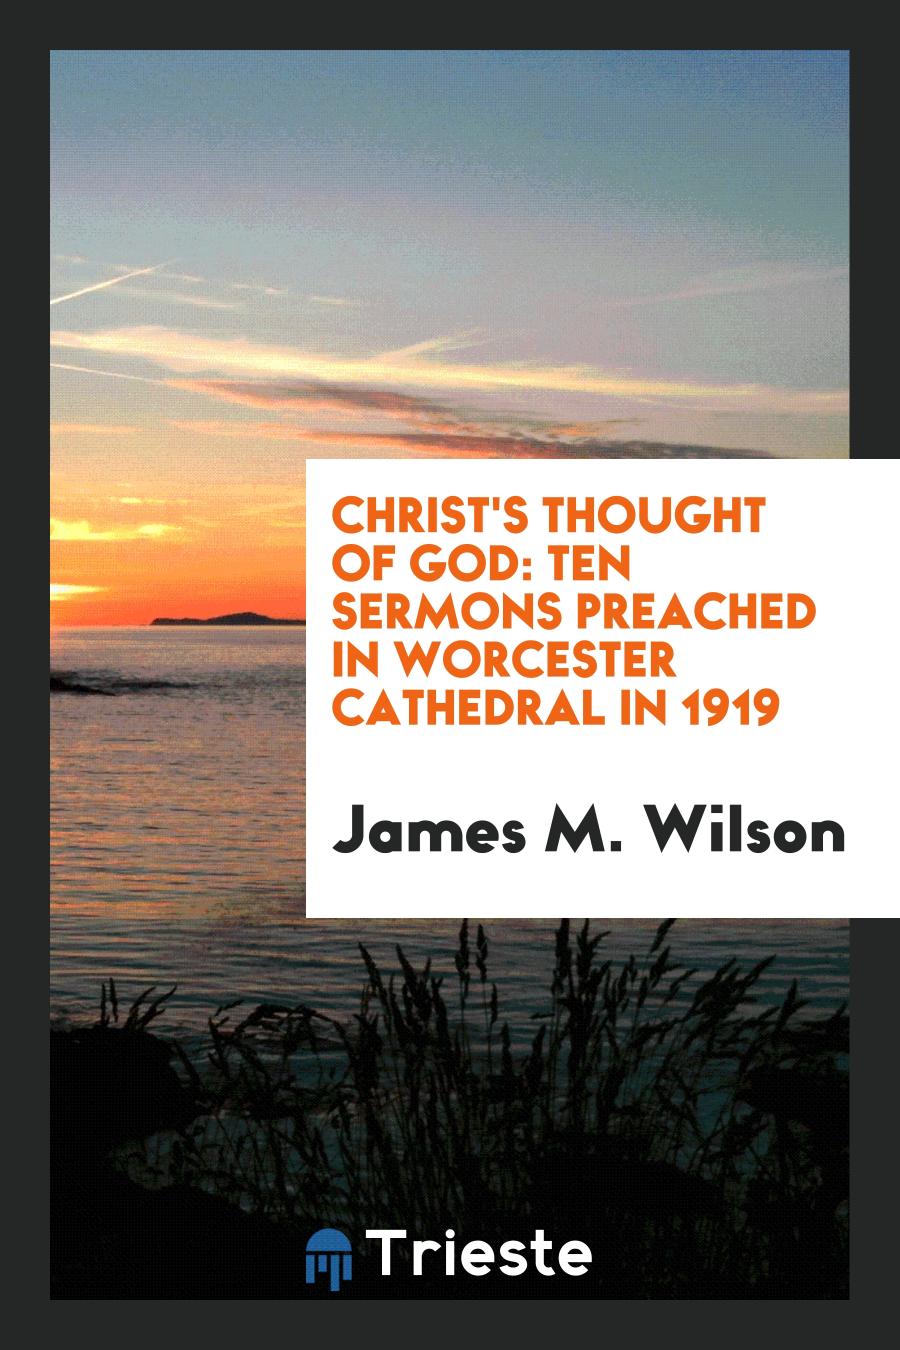 Christ's Thought of God: Ten Sermons Preached in Worcester Cathedral in 1919